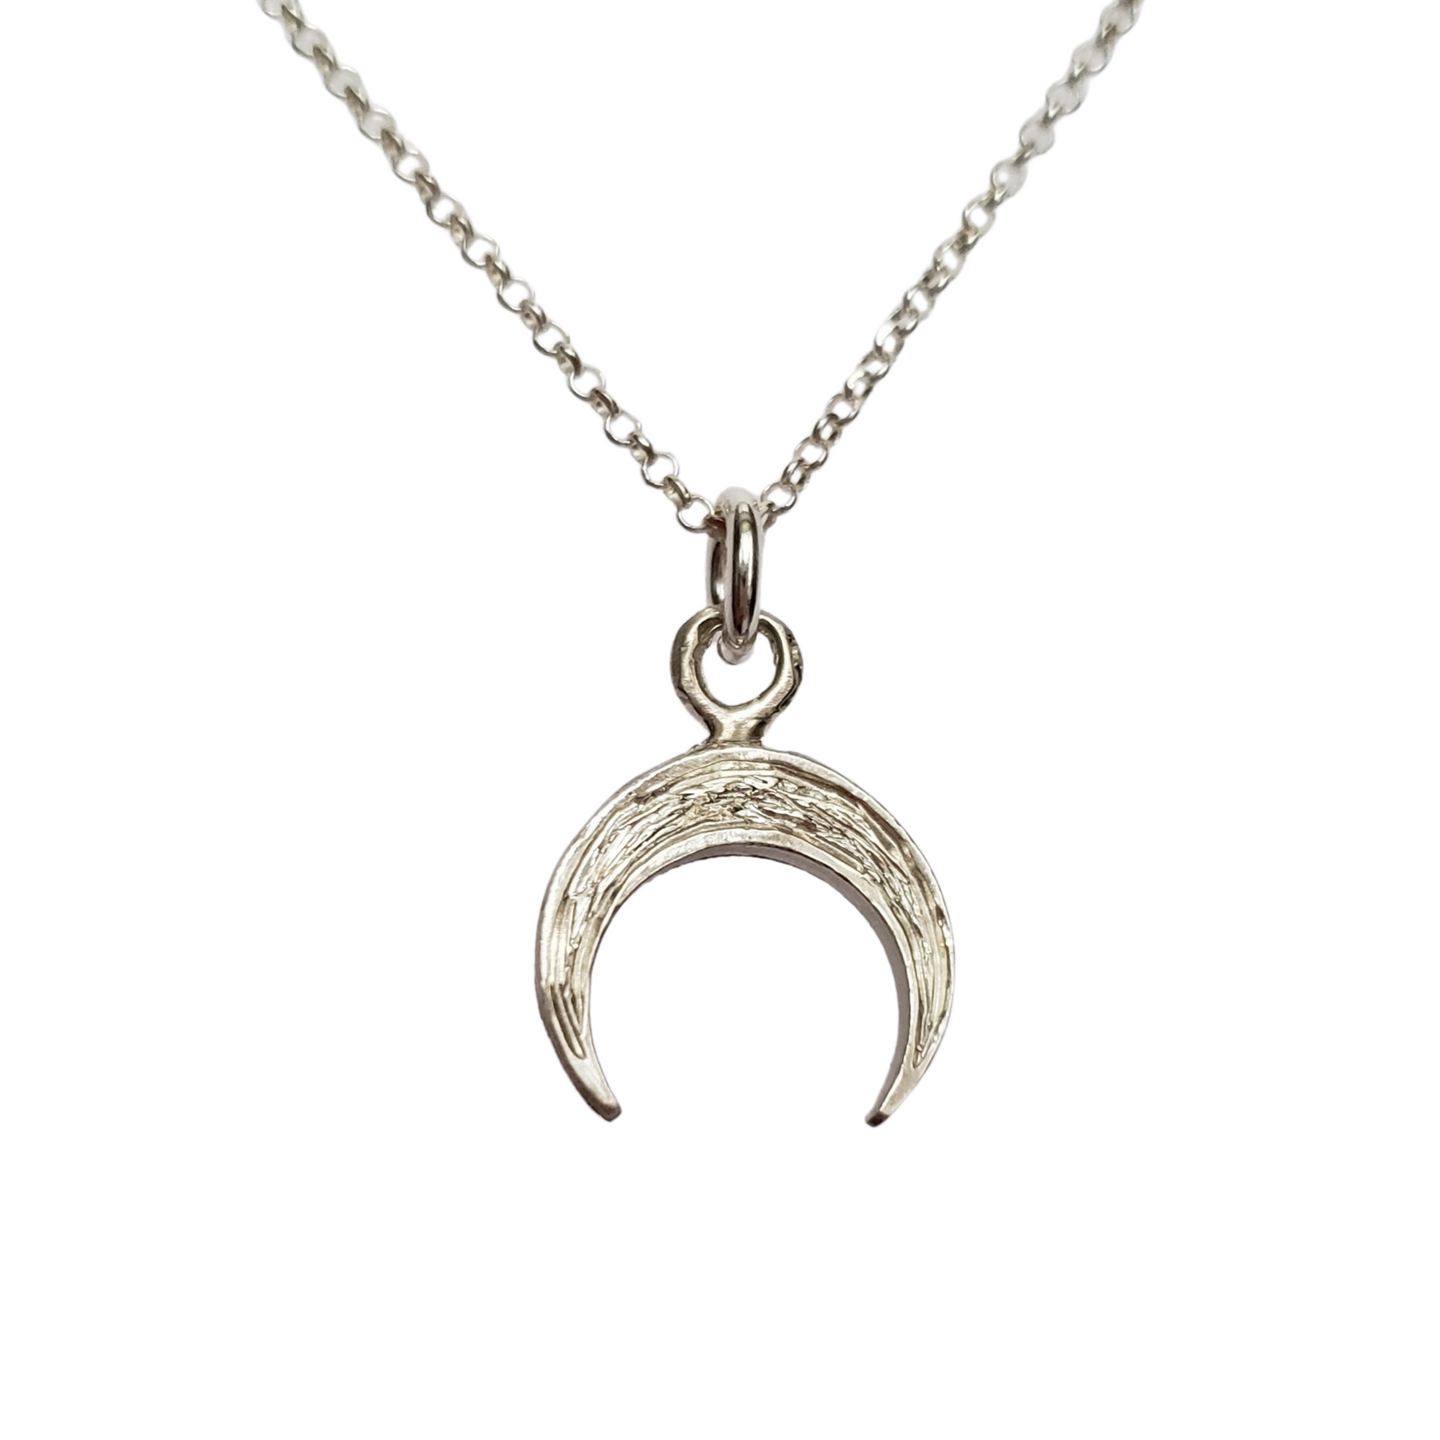 Down Turned Crescent Moon Necklace, Silver